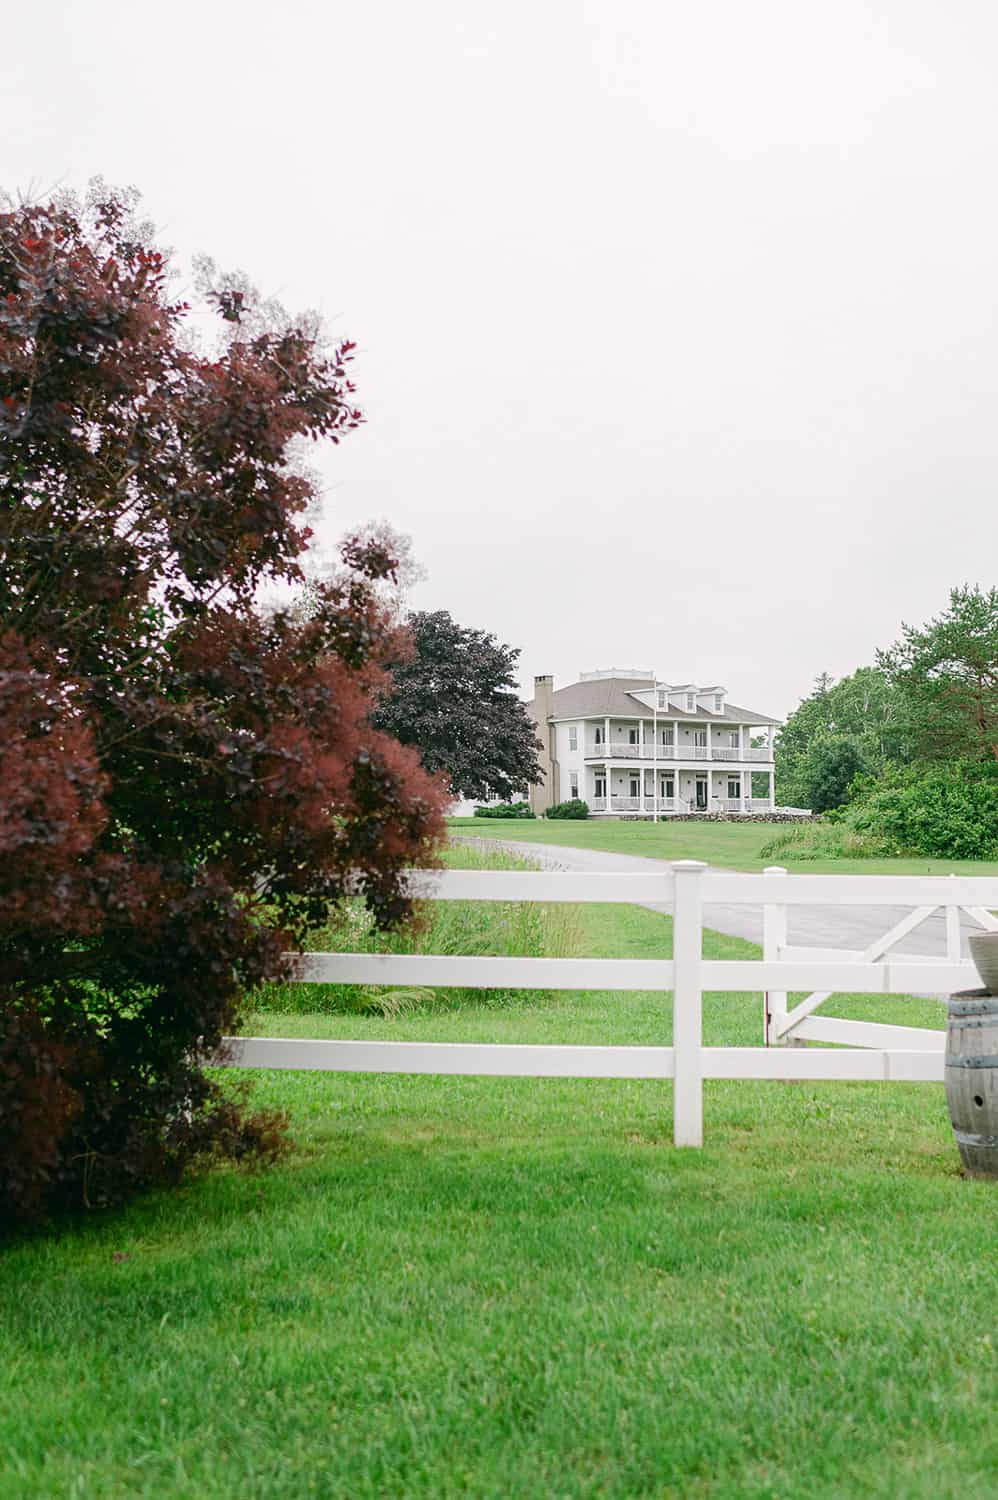 A white mansion at Ash Point Estate, viewed across a field with a white fence and a reddish-brown tree in the foreground.